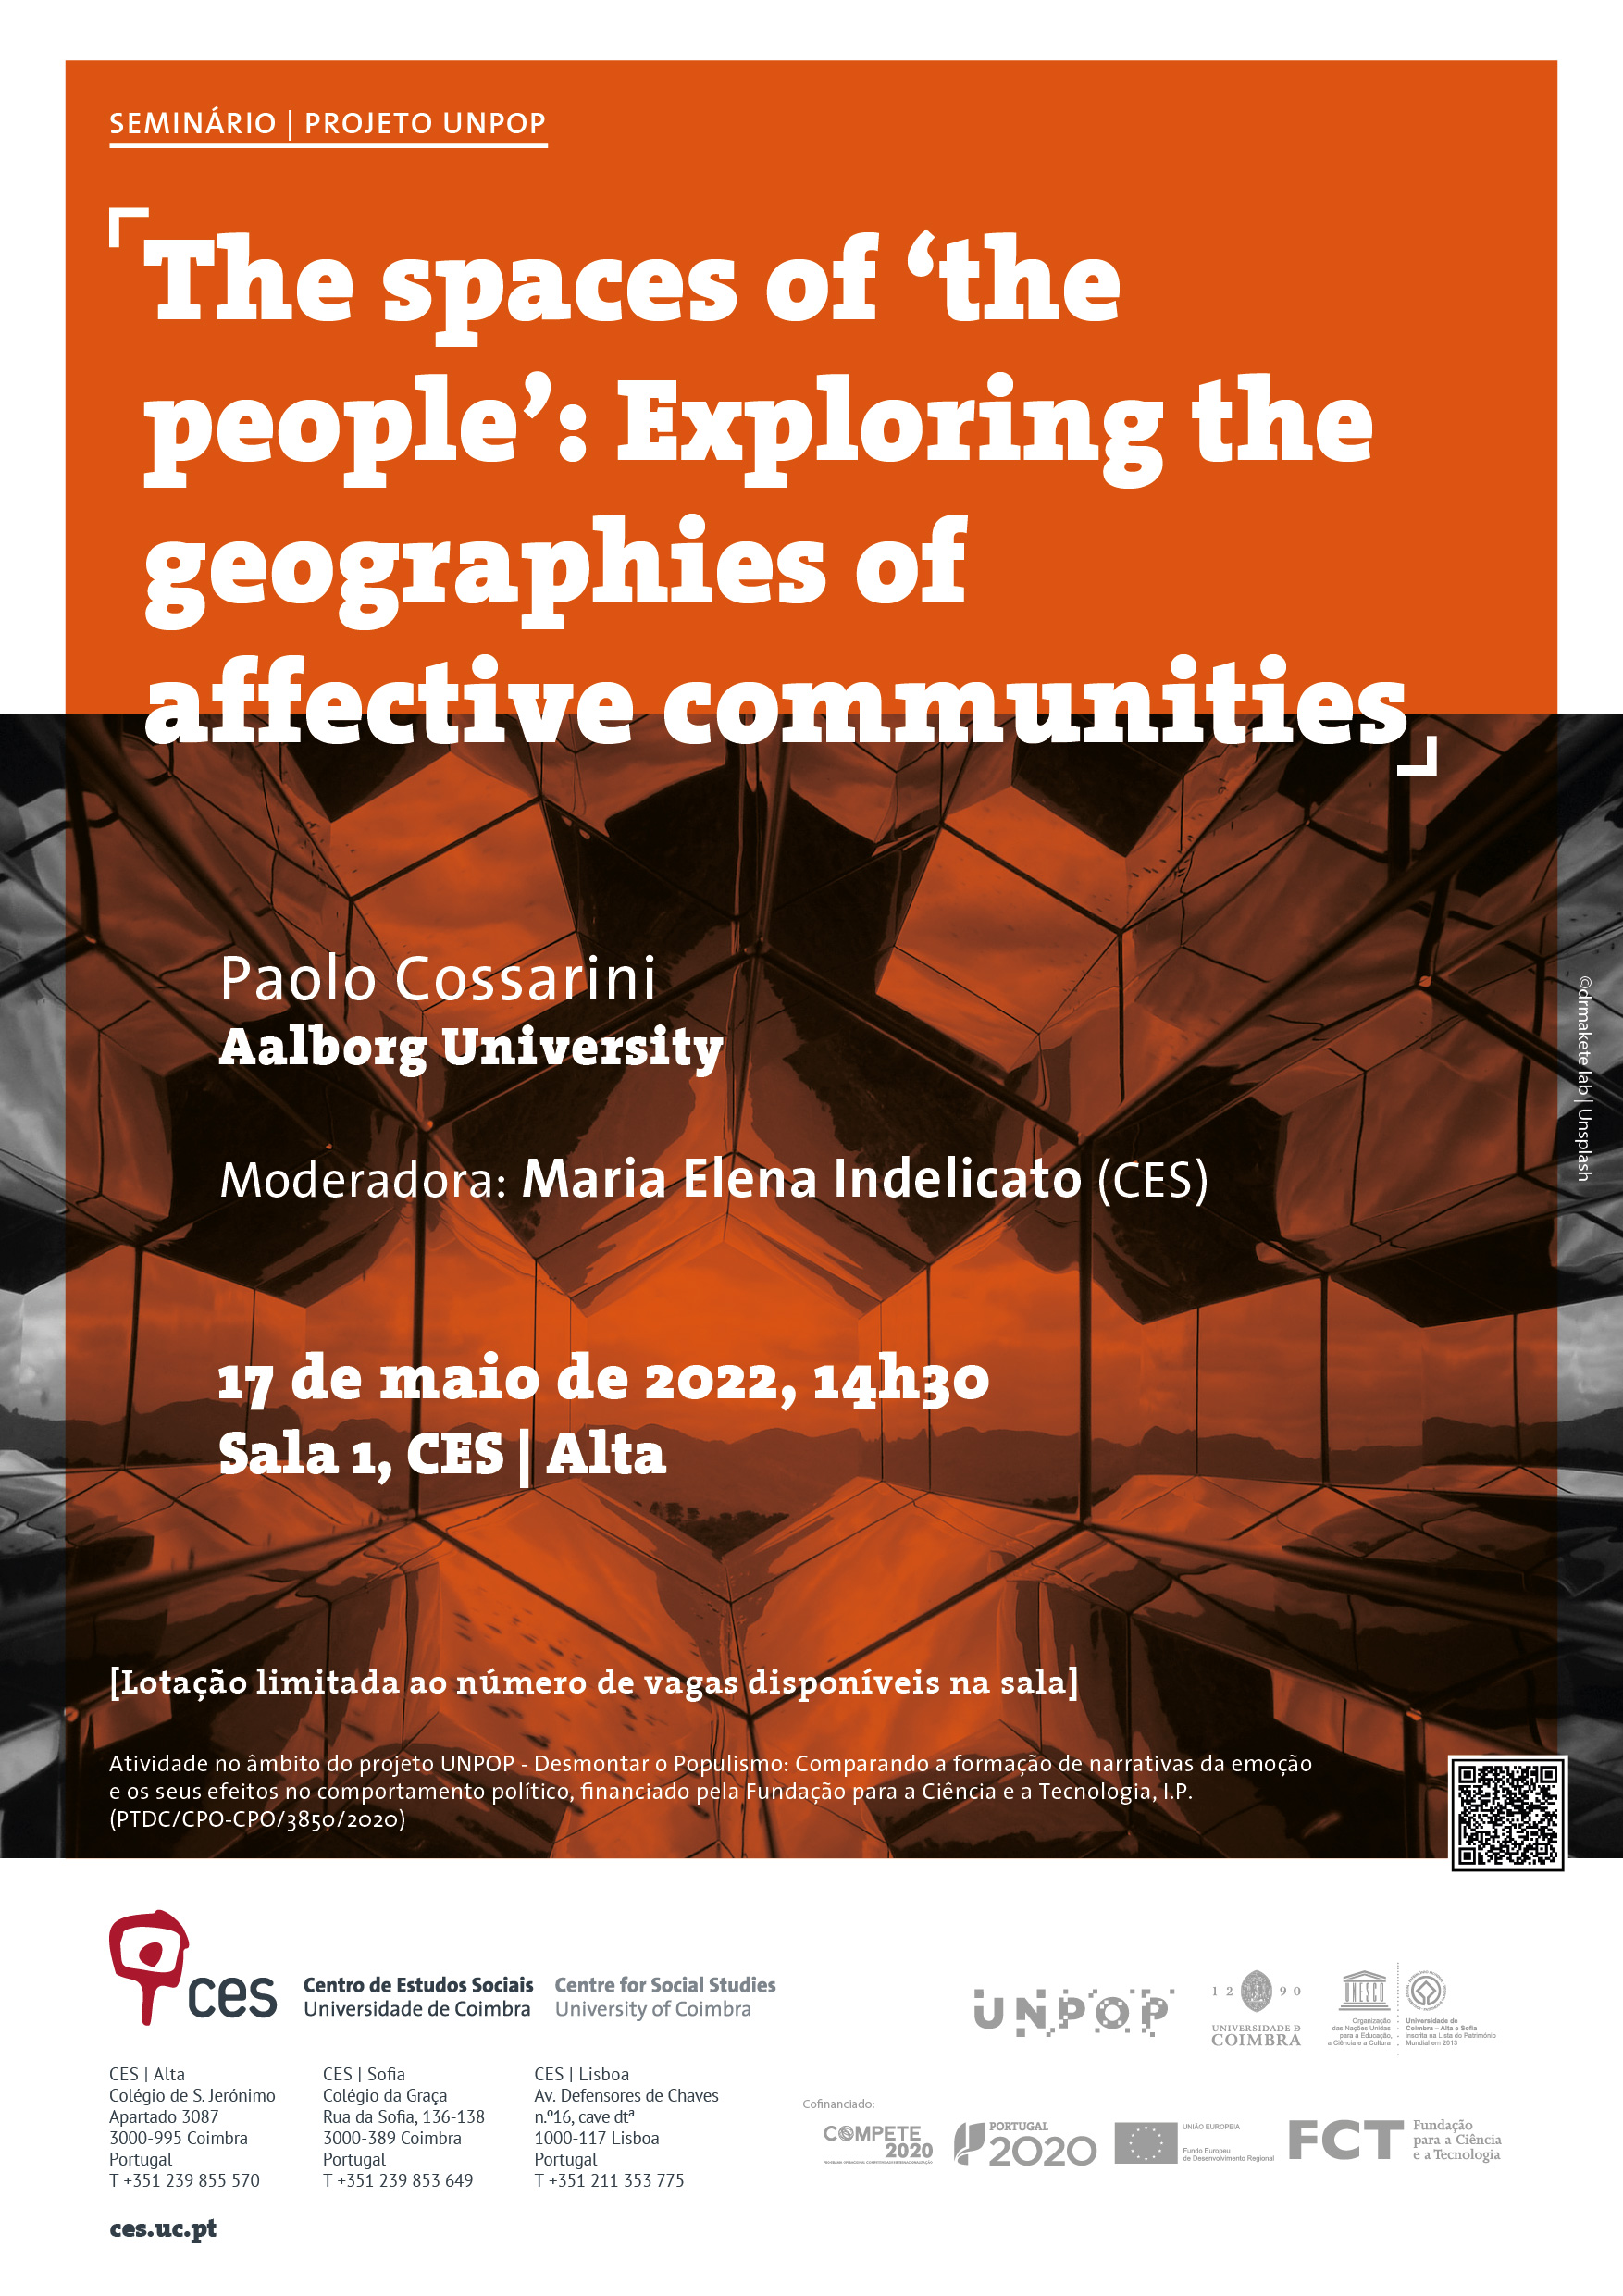 The spaces of ‘the people’: Exploring the geographies of affective communities<span id="edit_37822"><script>$(function() { $('#edit_37822').load( "/myces/user/editobj.php?tipo=evento&id=37822" ); });</script></span>